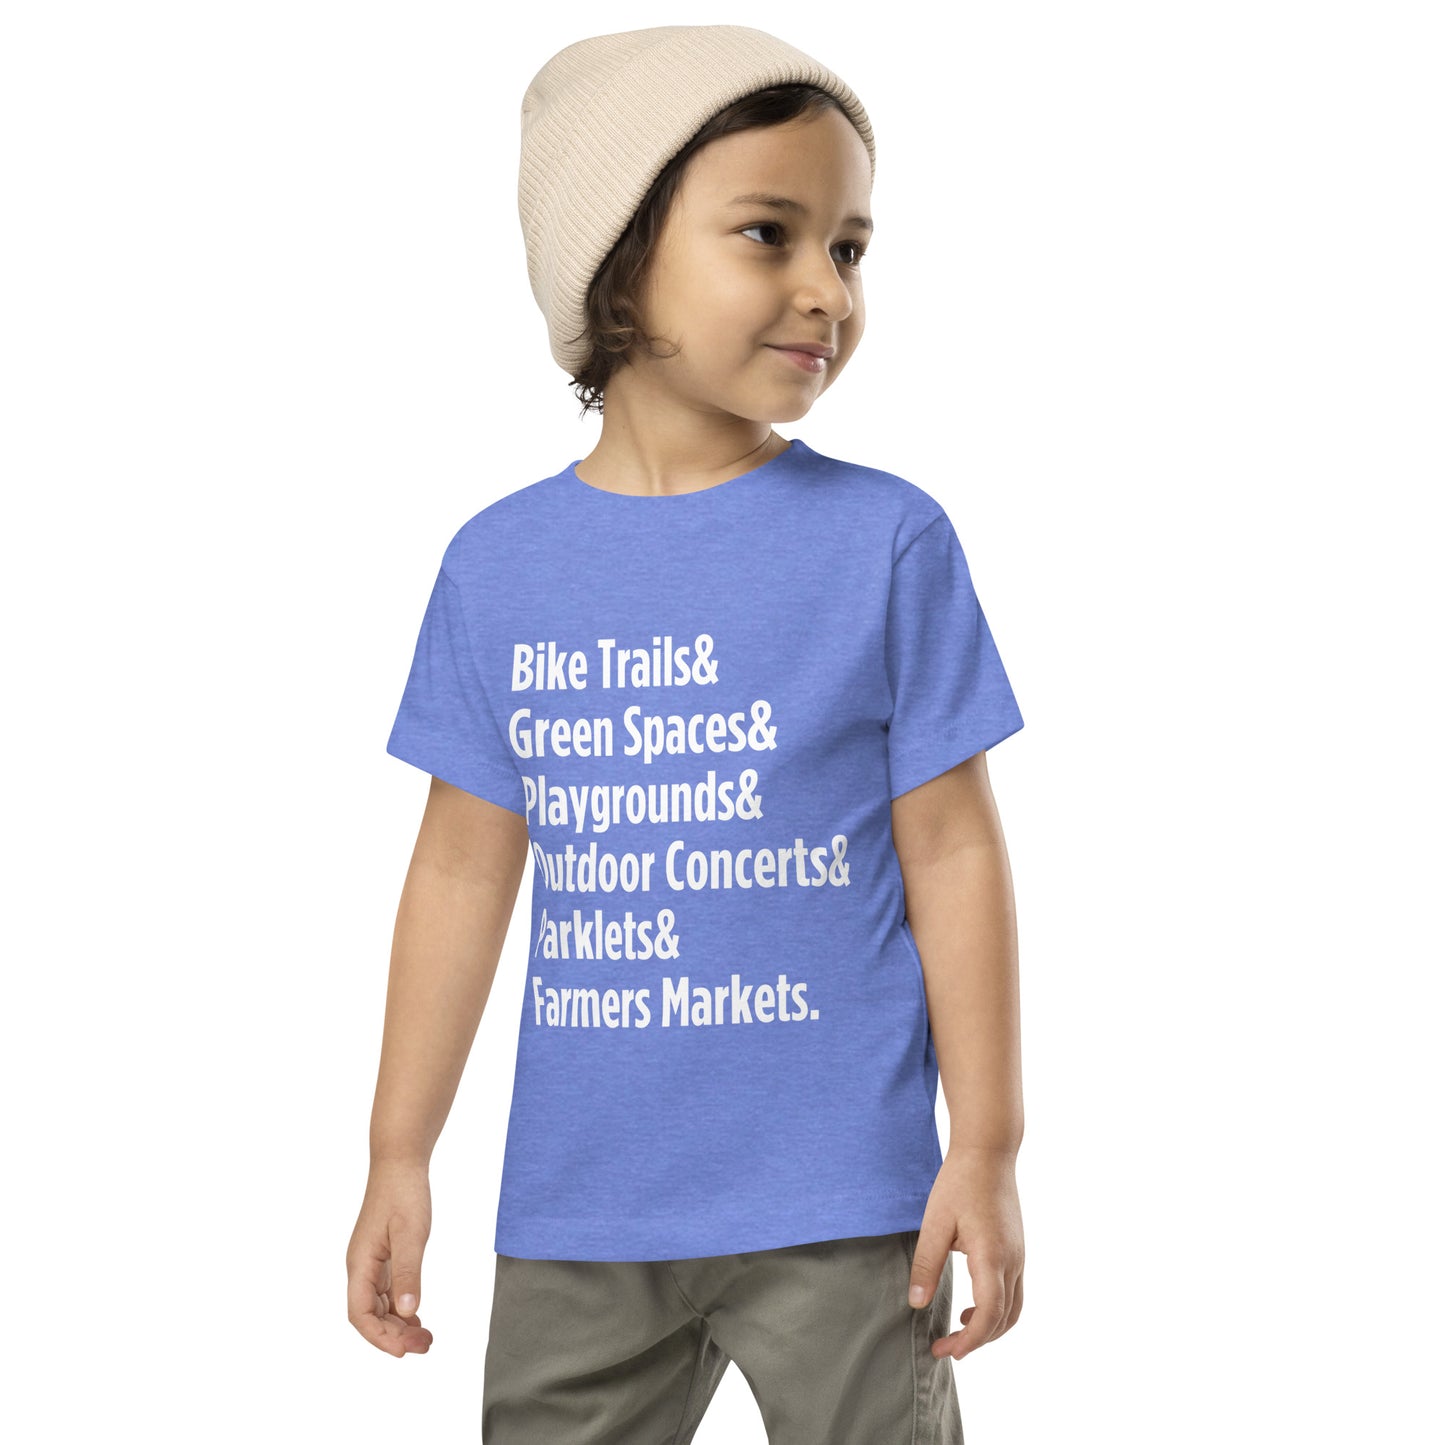 "Only on Main Street" (Greenspaces) Toddler Short Sleeve Tee